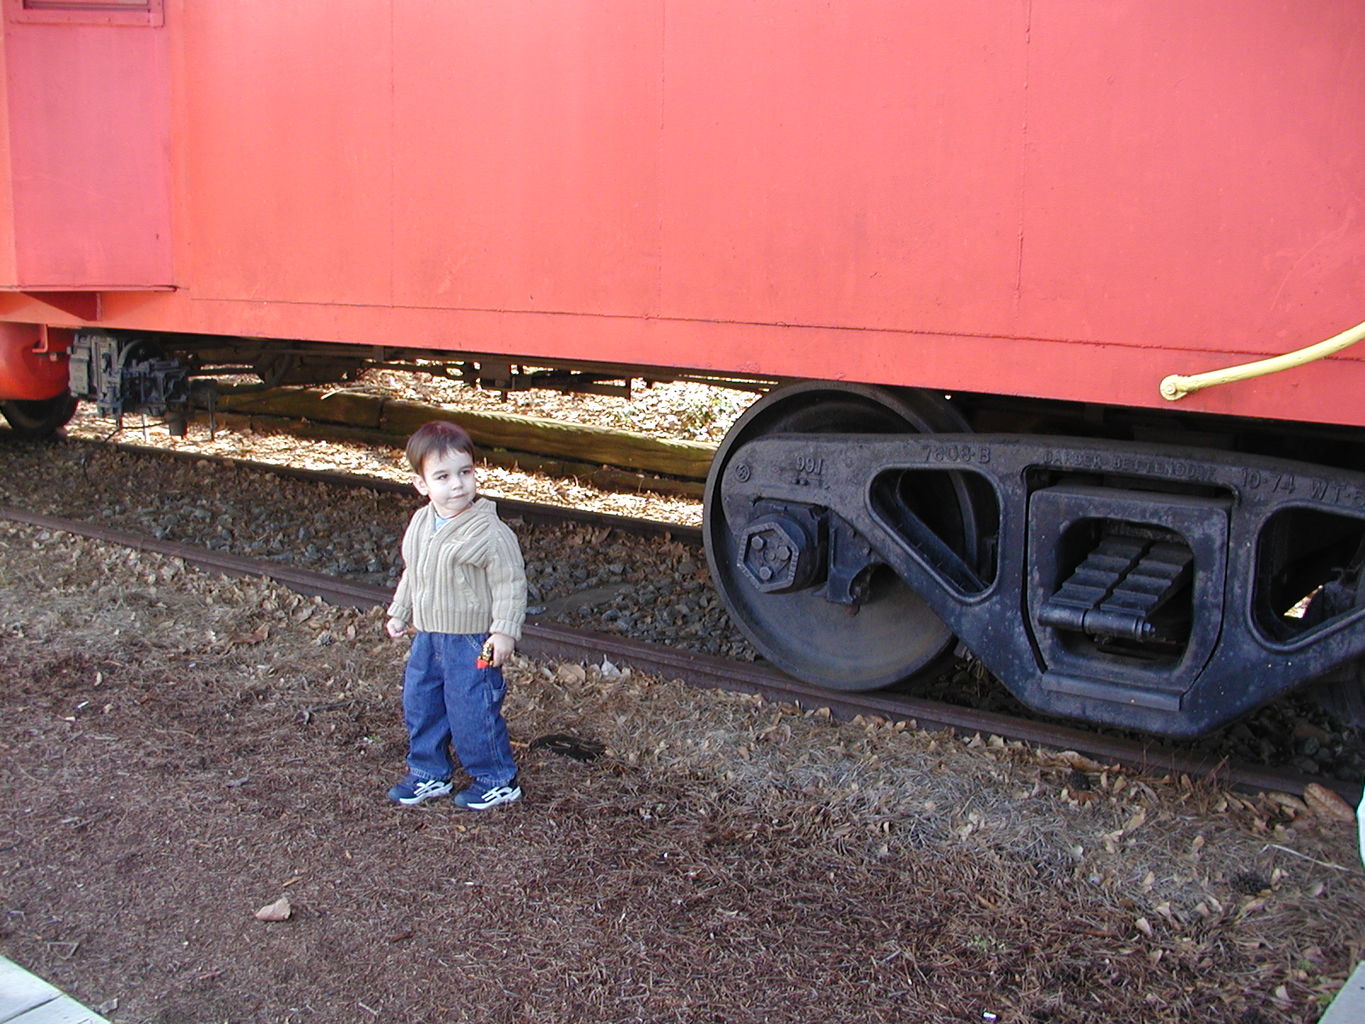 James sees the Big Trains
